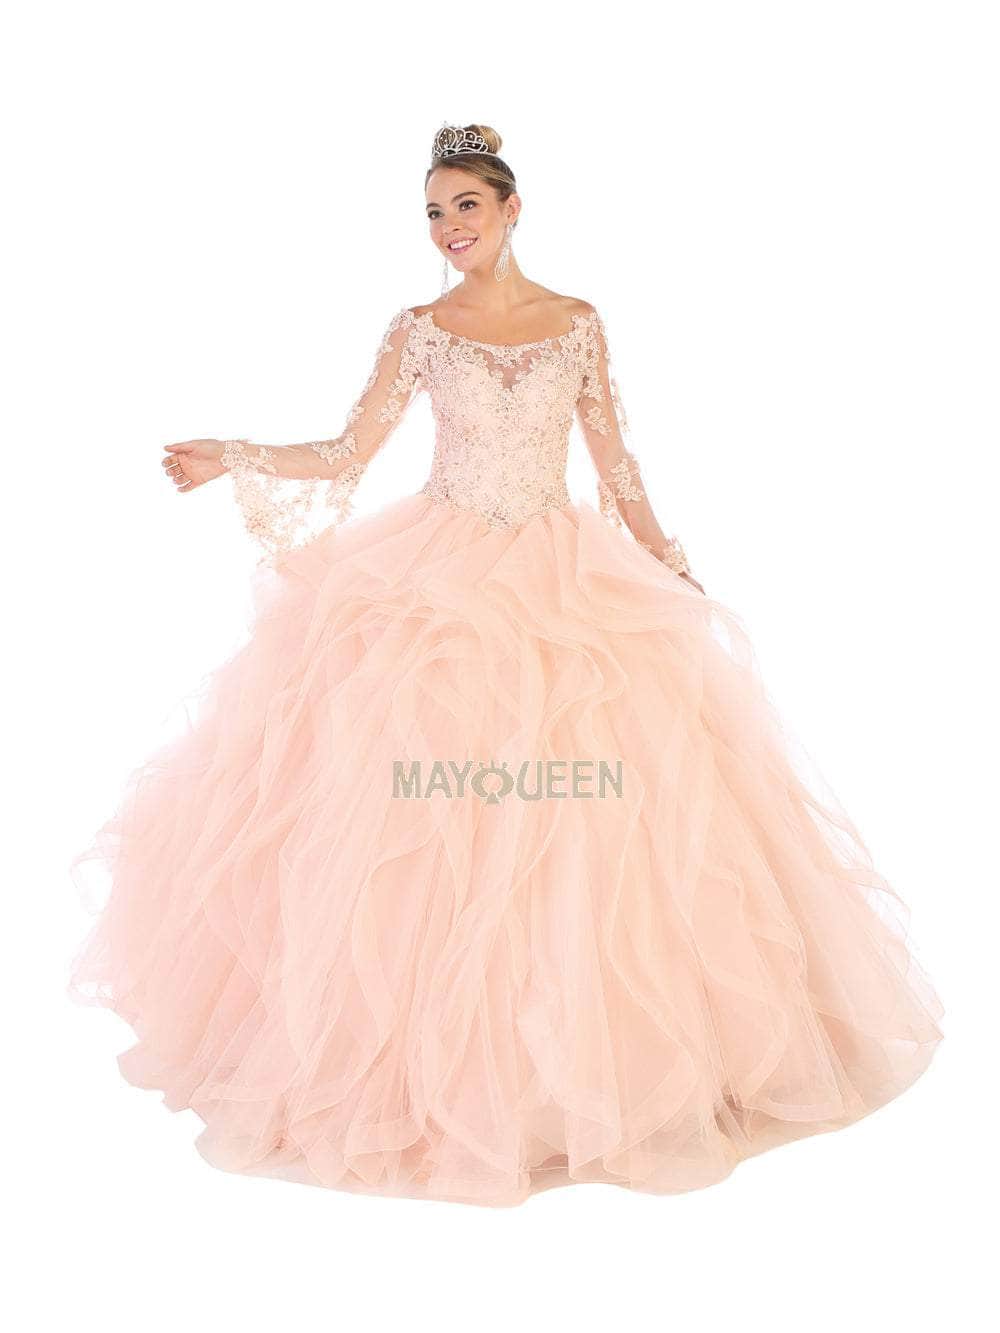 May Queen LK109 - Floral Applique Ballgown Special Occasion Dress